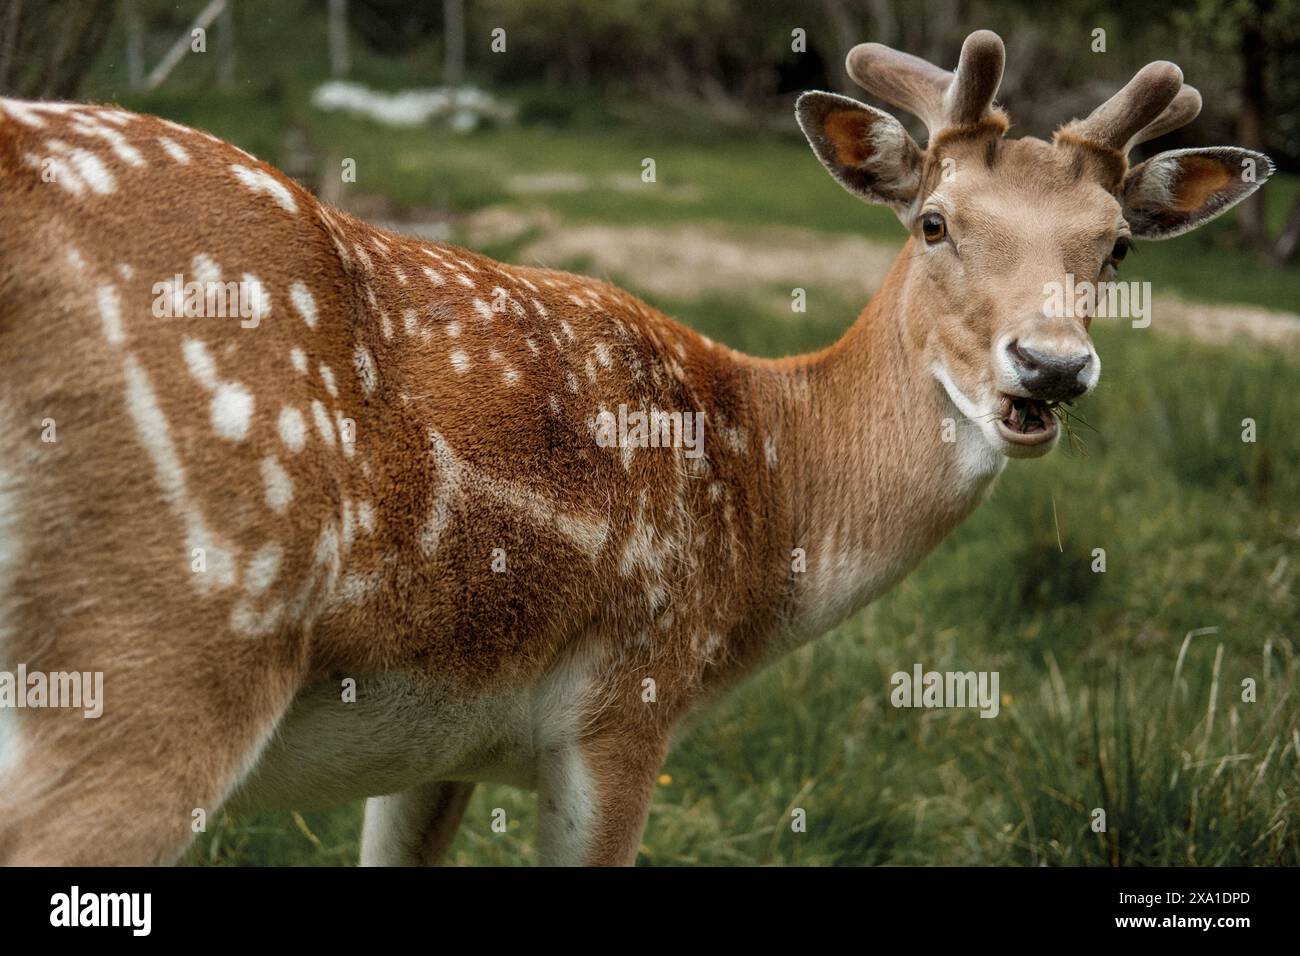 An Iranian fallow deer (Dama dama mesopotamica) with spotted fur in a grassy field Stock Photo